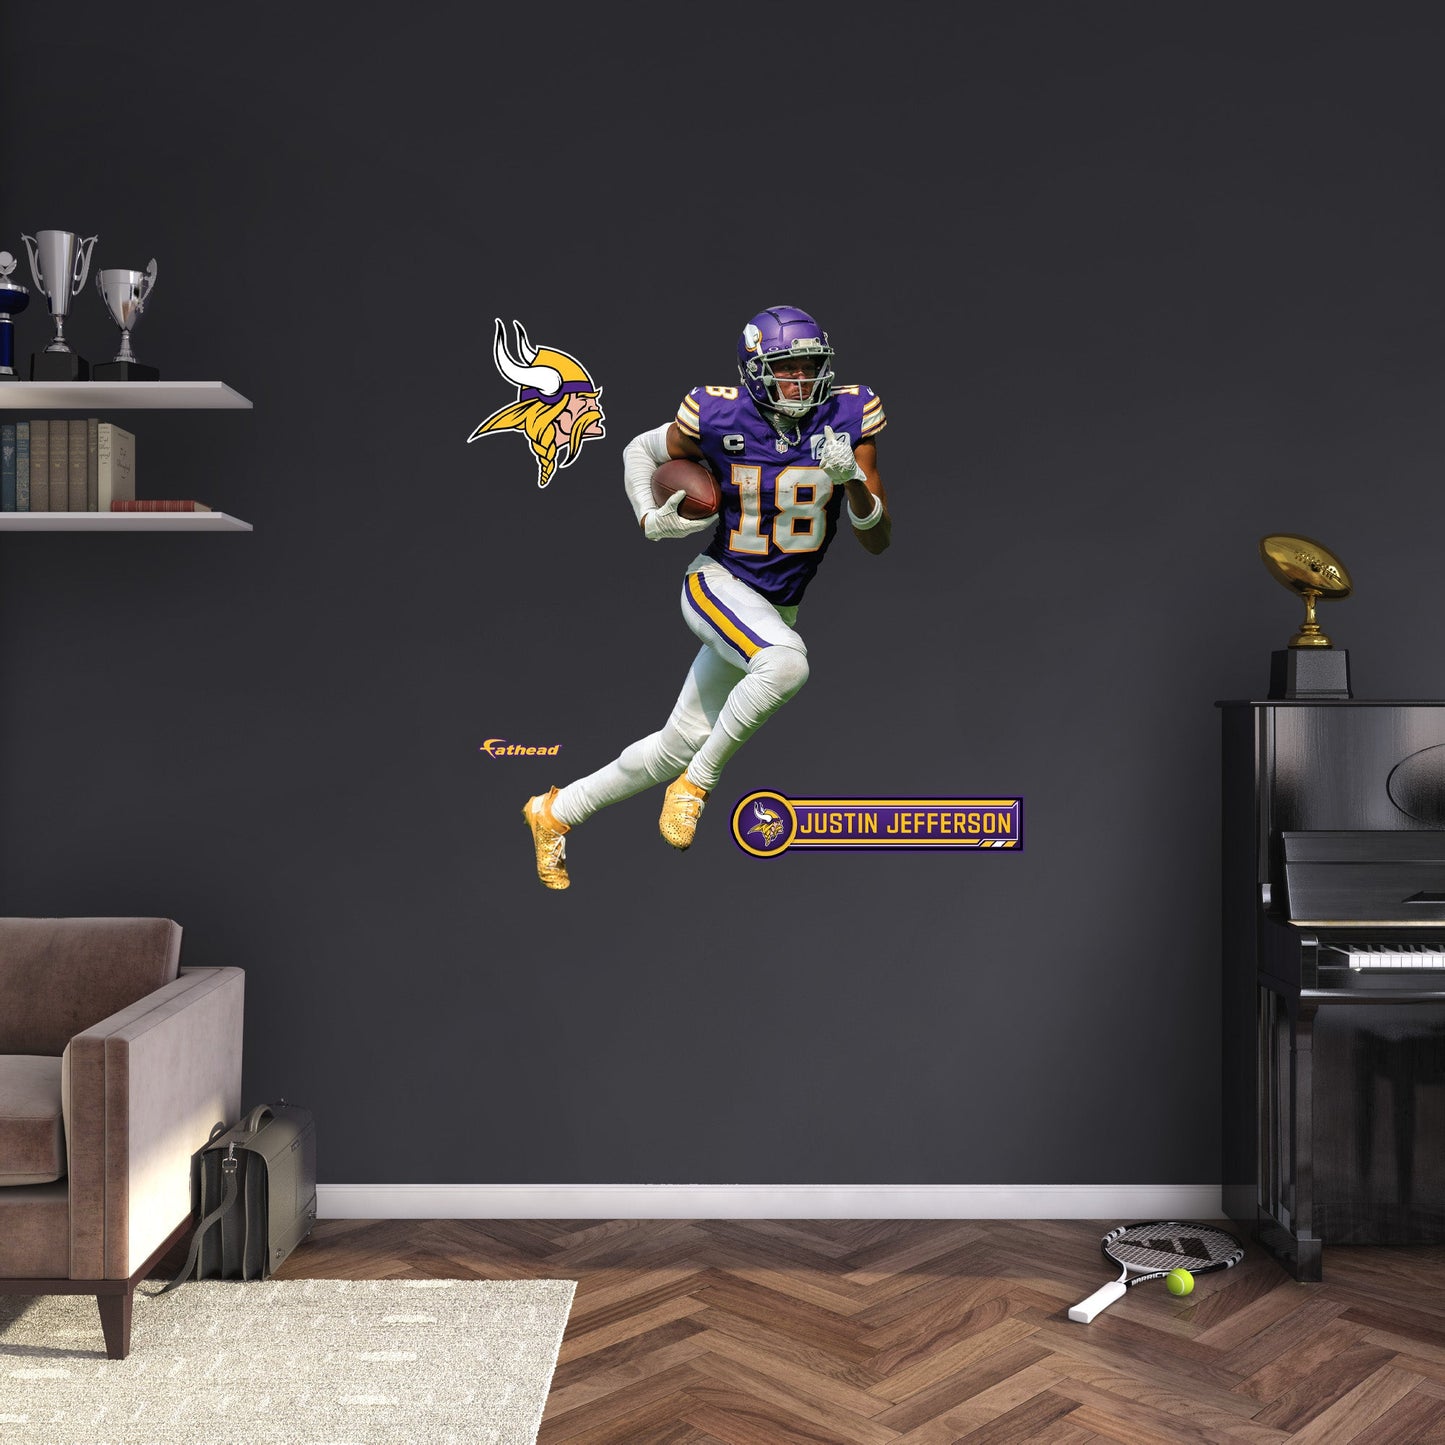 Minnesota Vikings: Justin Jefferson Throwback        - Officially Licensed NFL Removable     Adhesive Decal